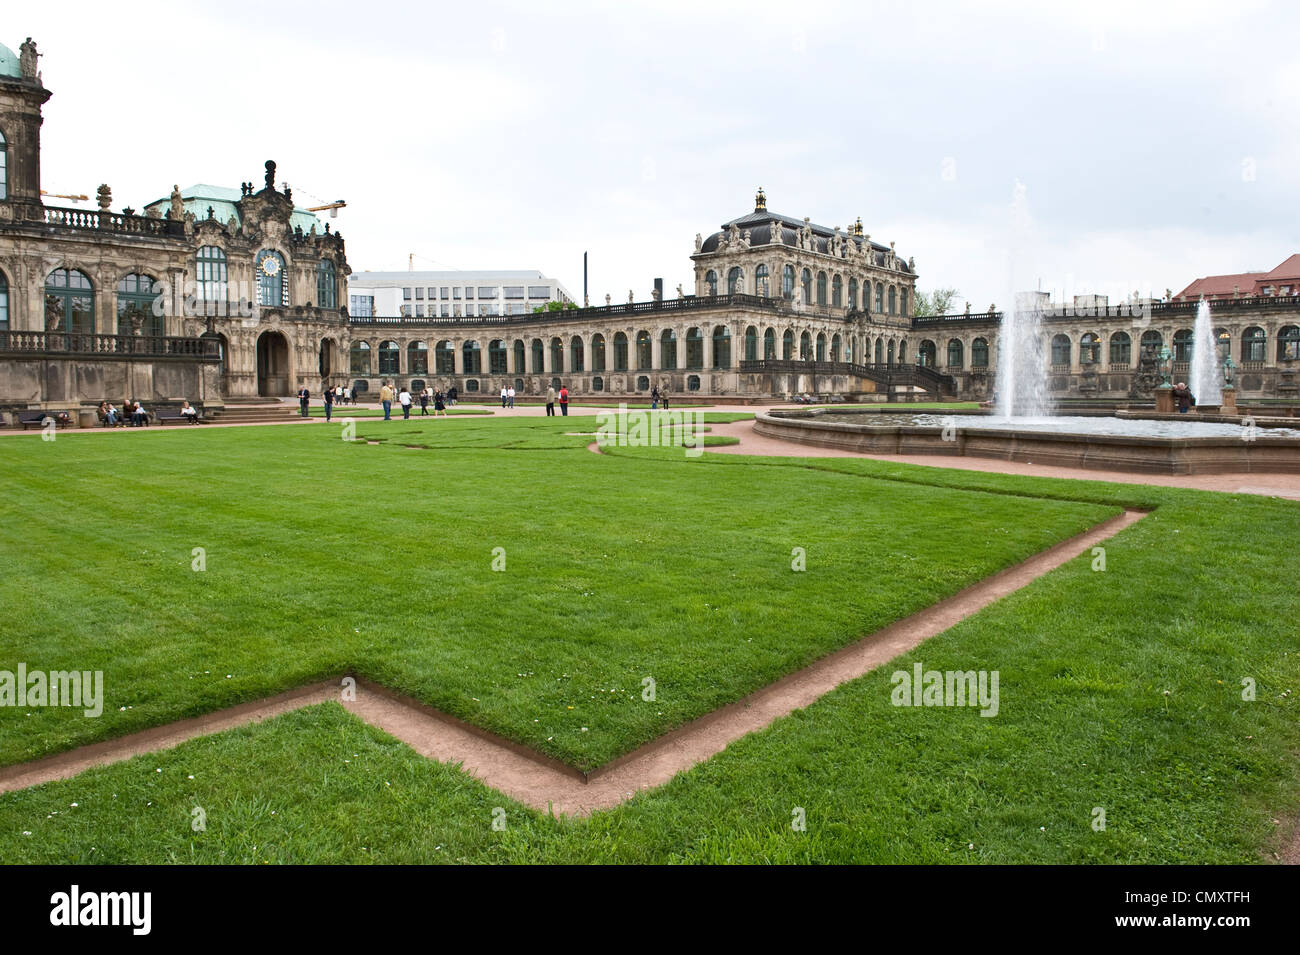 Zwinger Palace at a European city. Stock Photo